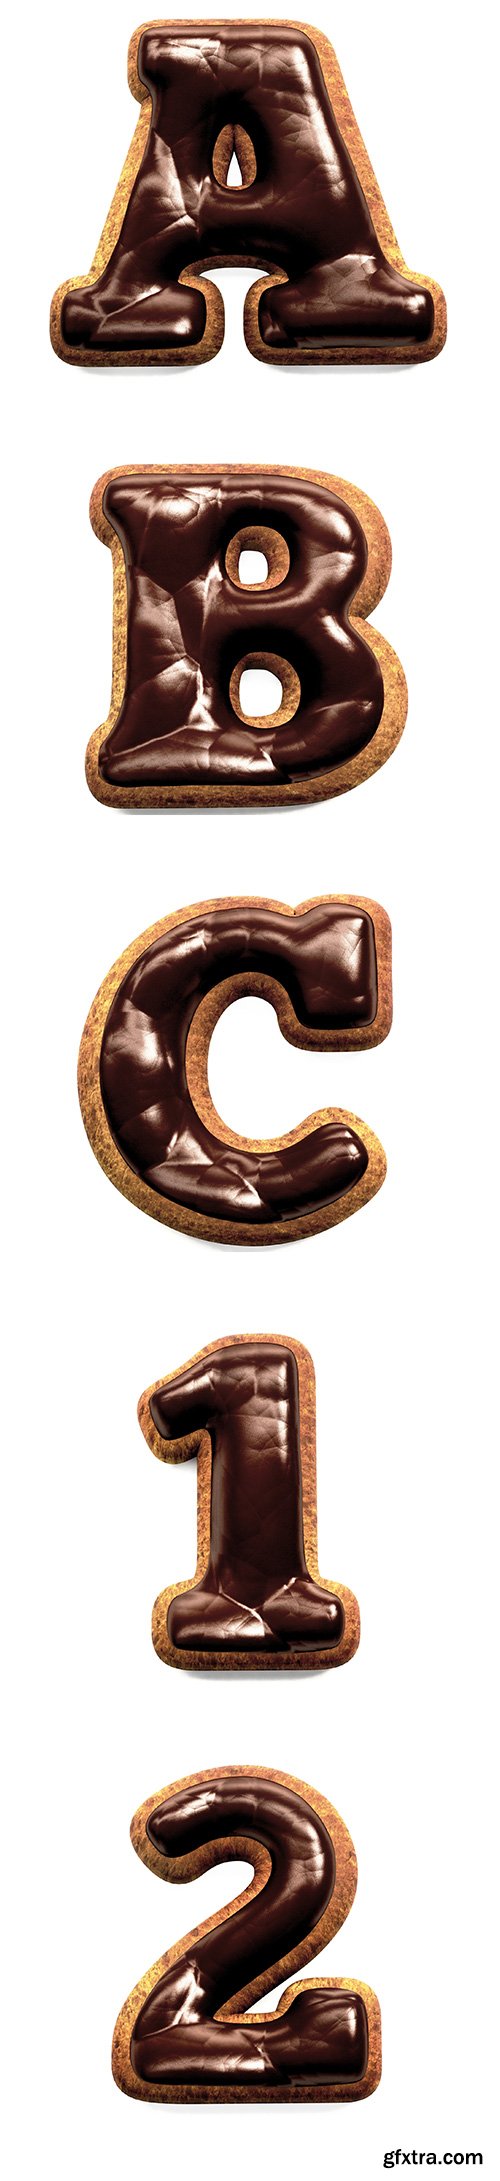 Gingerbread Biscuit Font Decorated With Chocolate Isolated - 31xJPGs